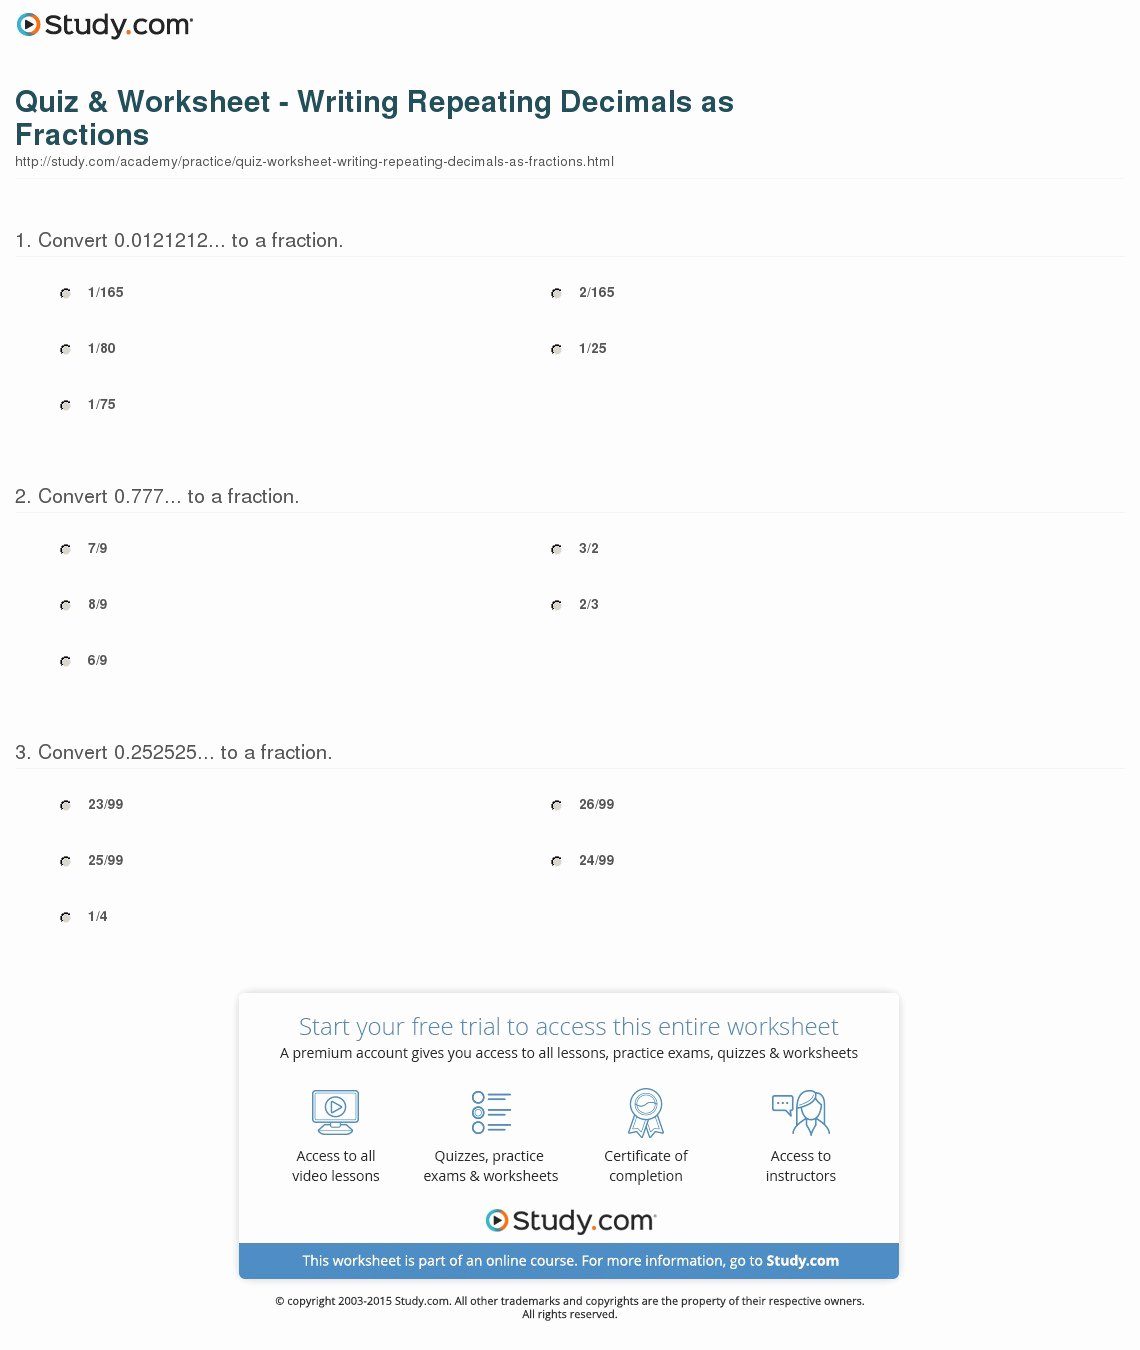 Repeating Decimal to Fraction Worksheet Unique Quiz &amp; Worksheet Writing Repeating Decimals as Fractions